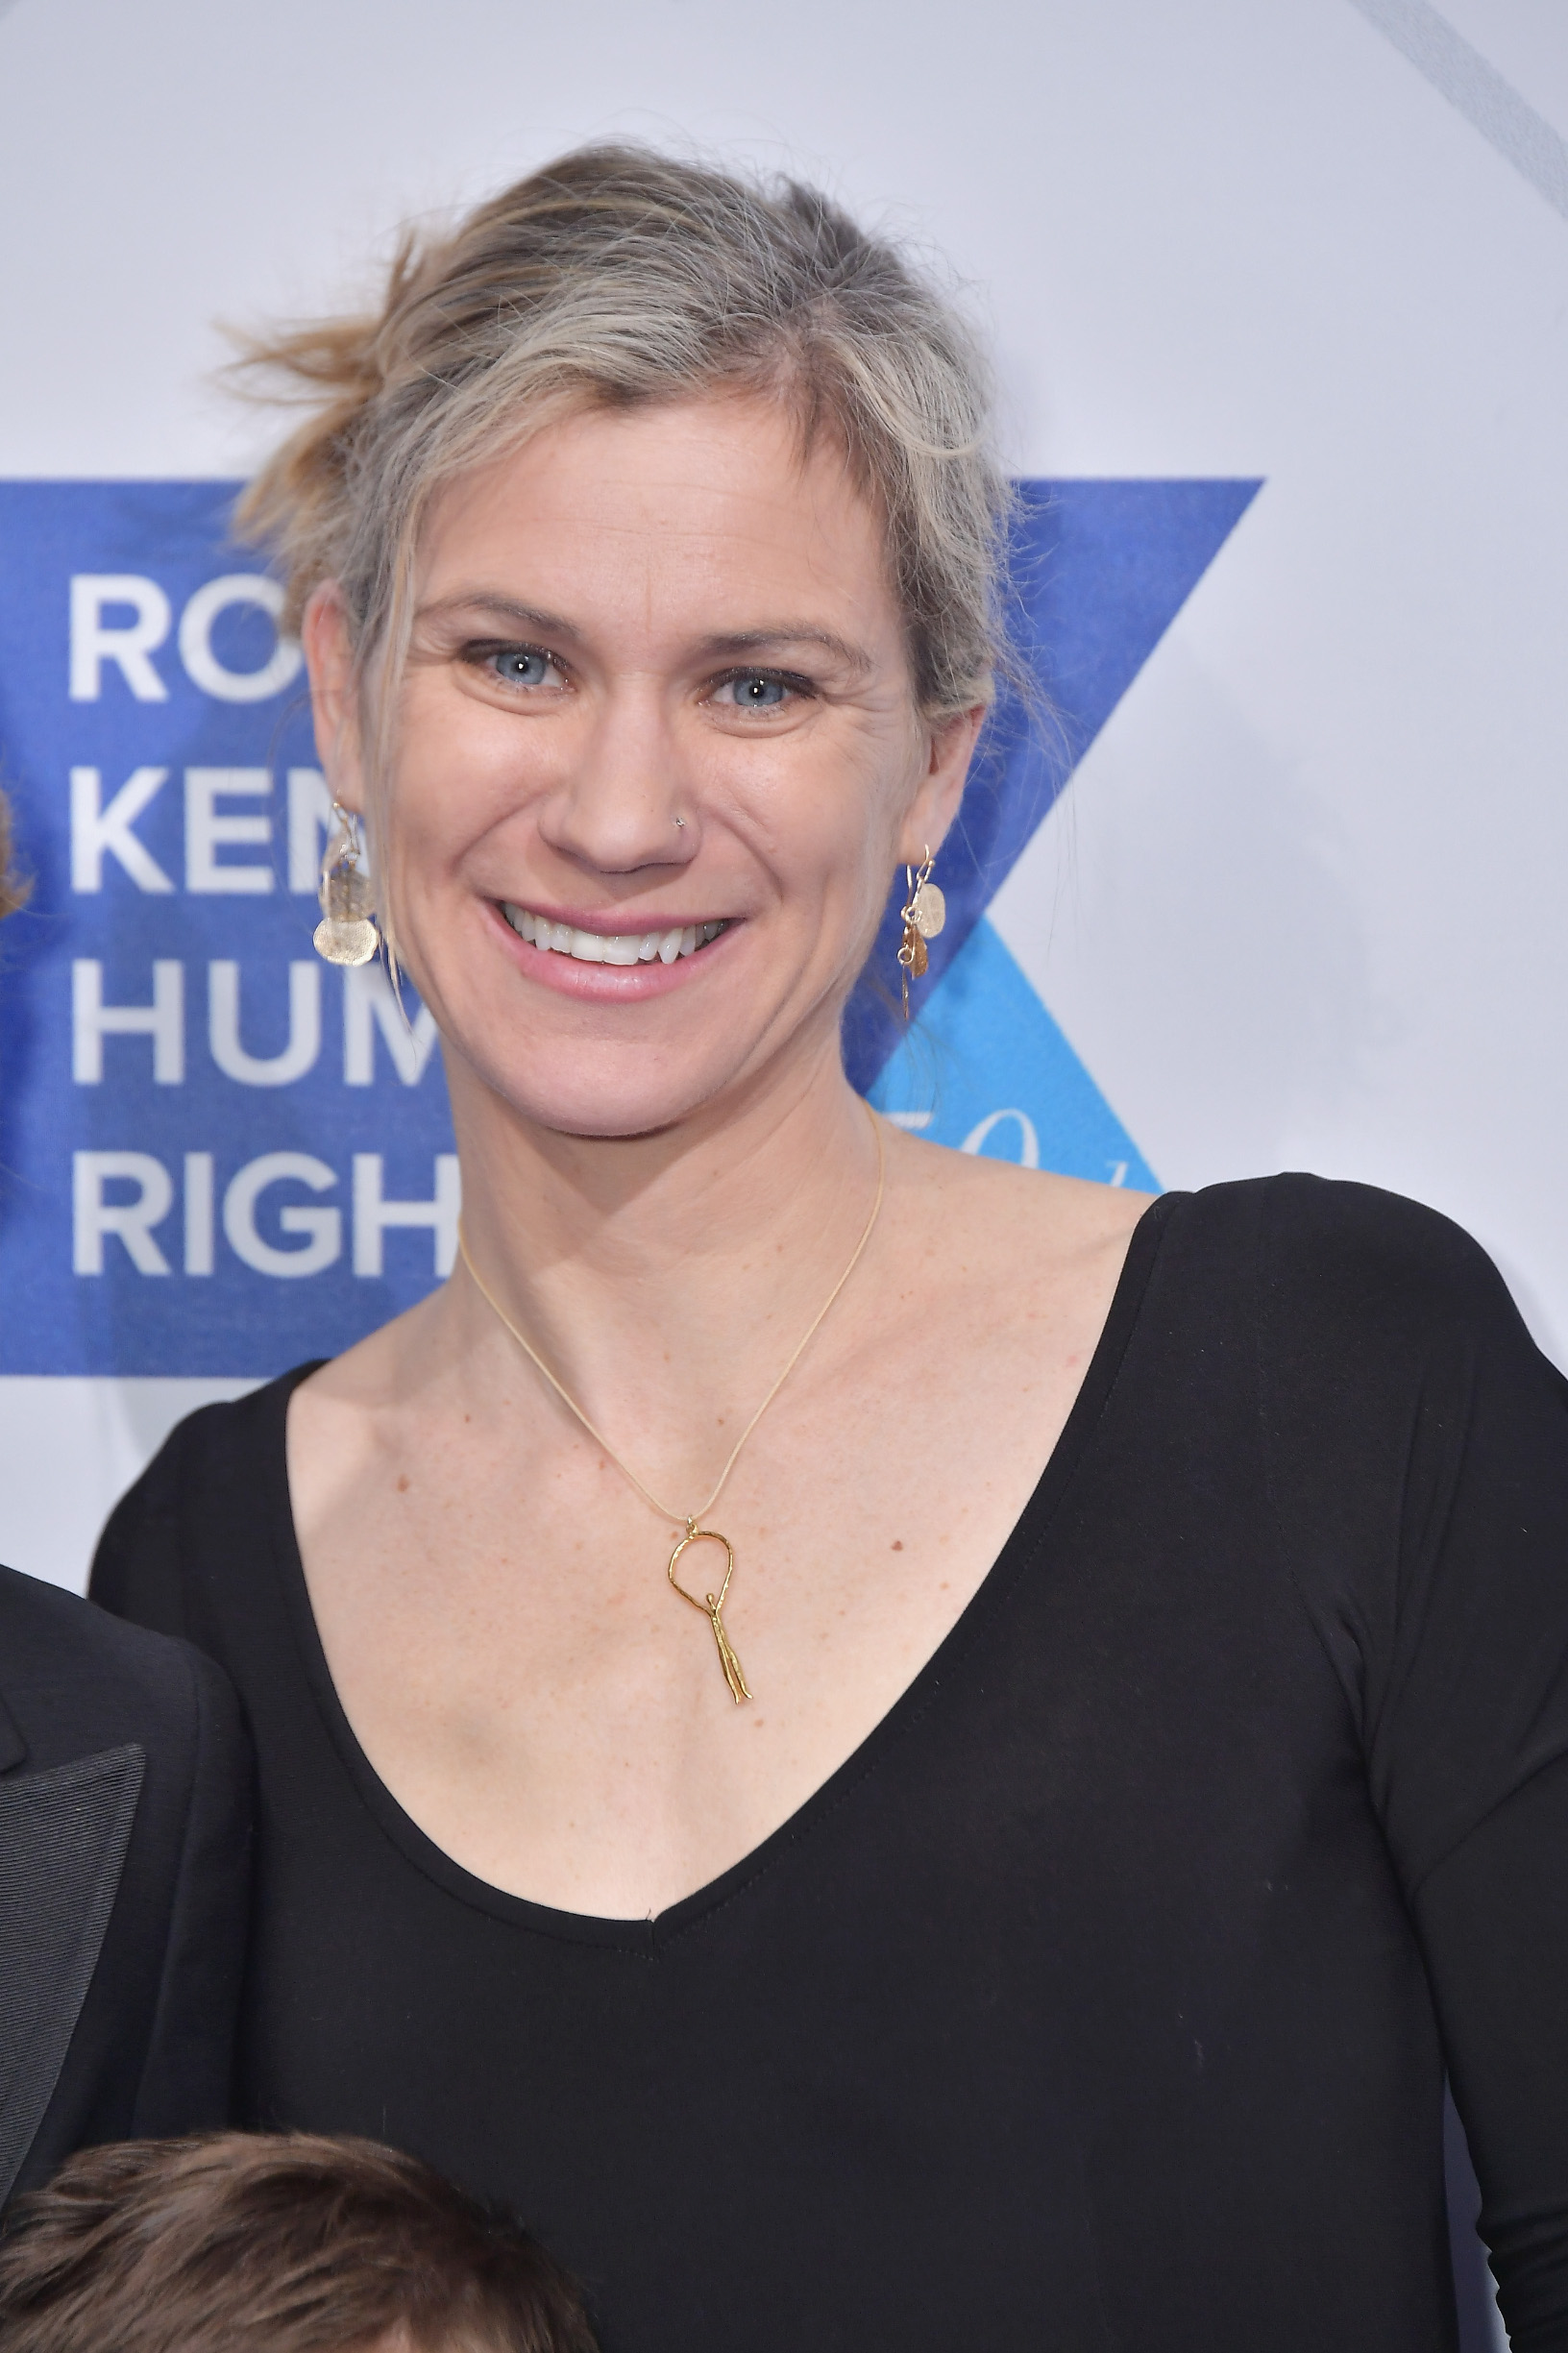 NEW YORK, NY - DECEMBER 12: Maeve McKean attends the 2019 Robert F. Kennedy Human Rights Ripple Of Hope Awards on December 12, 2018 in New York City.  (Photo by Michael Loccisano/Getty Images  for  Robert F. Kennedy Human Rights )